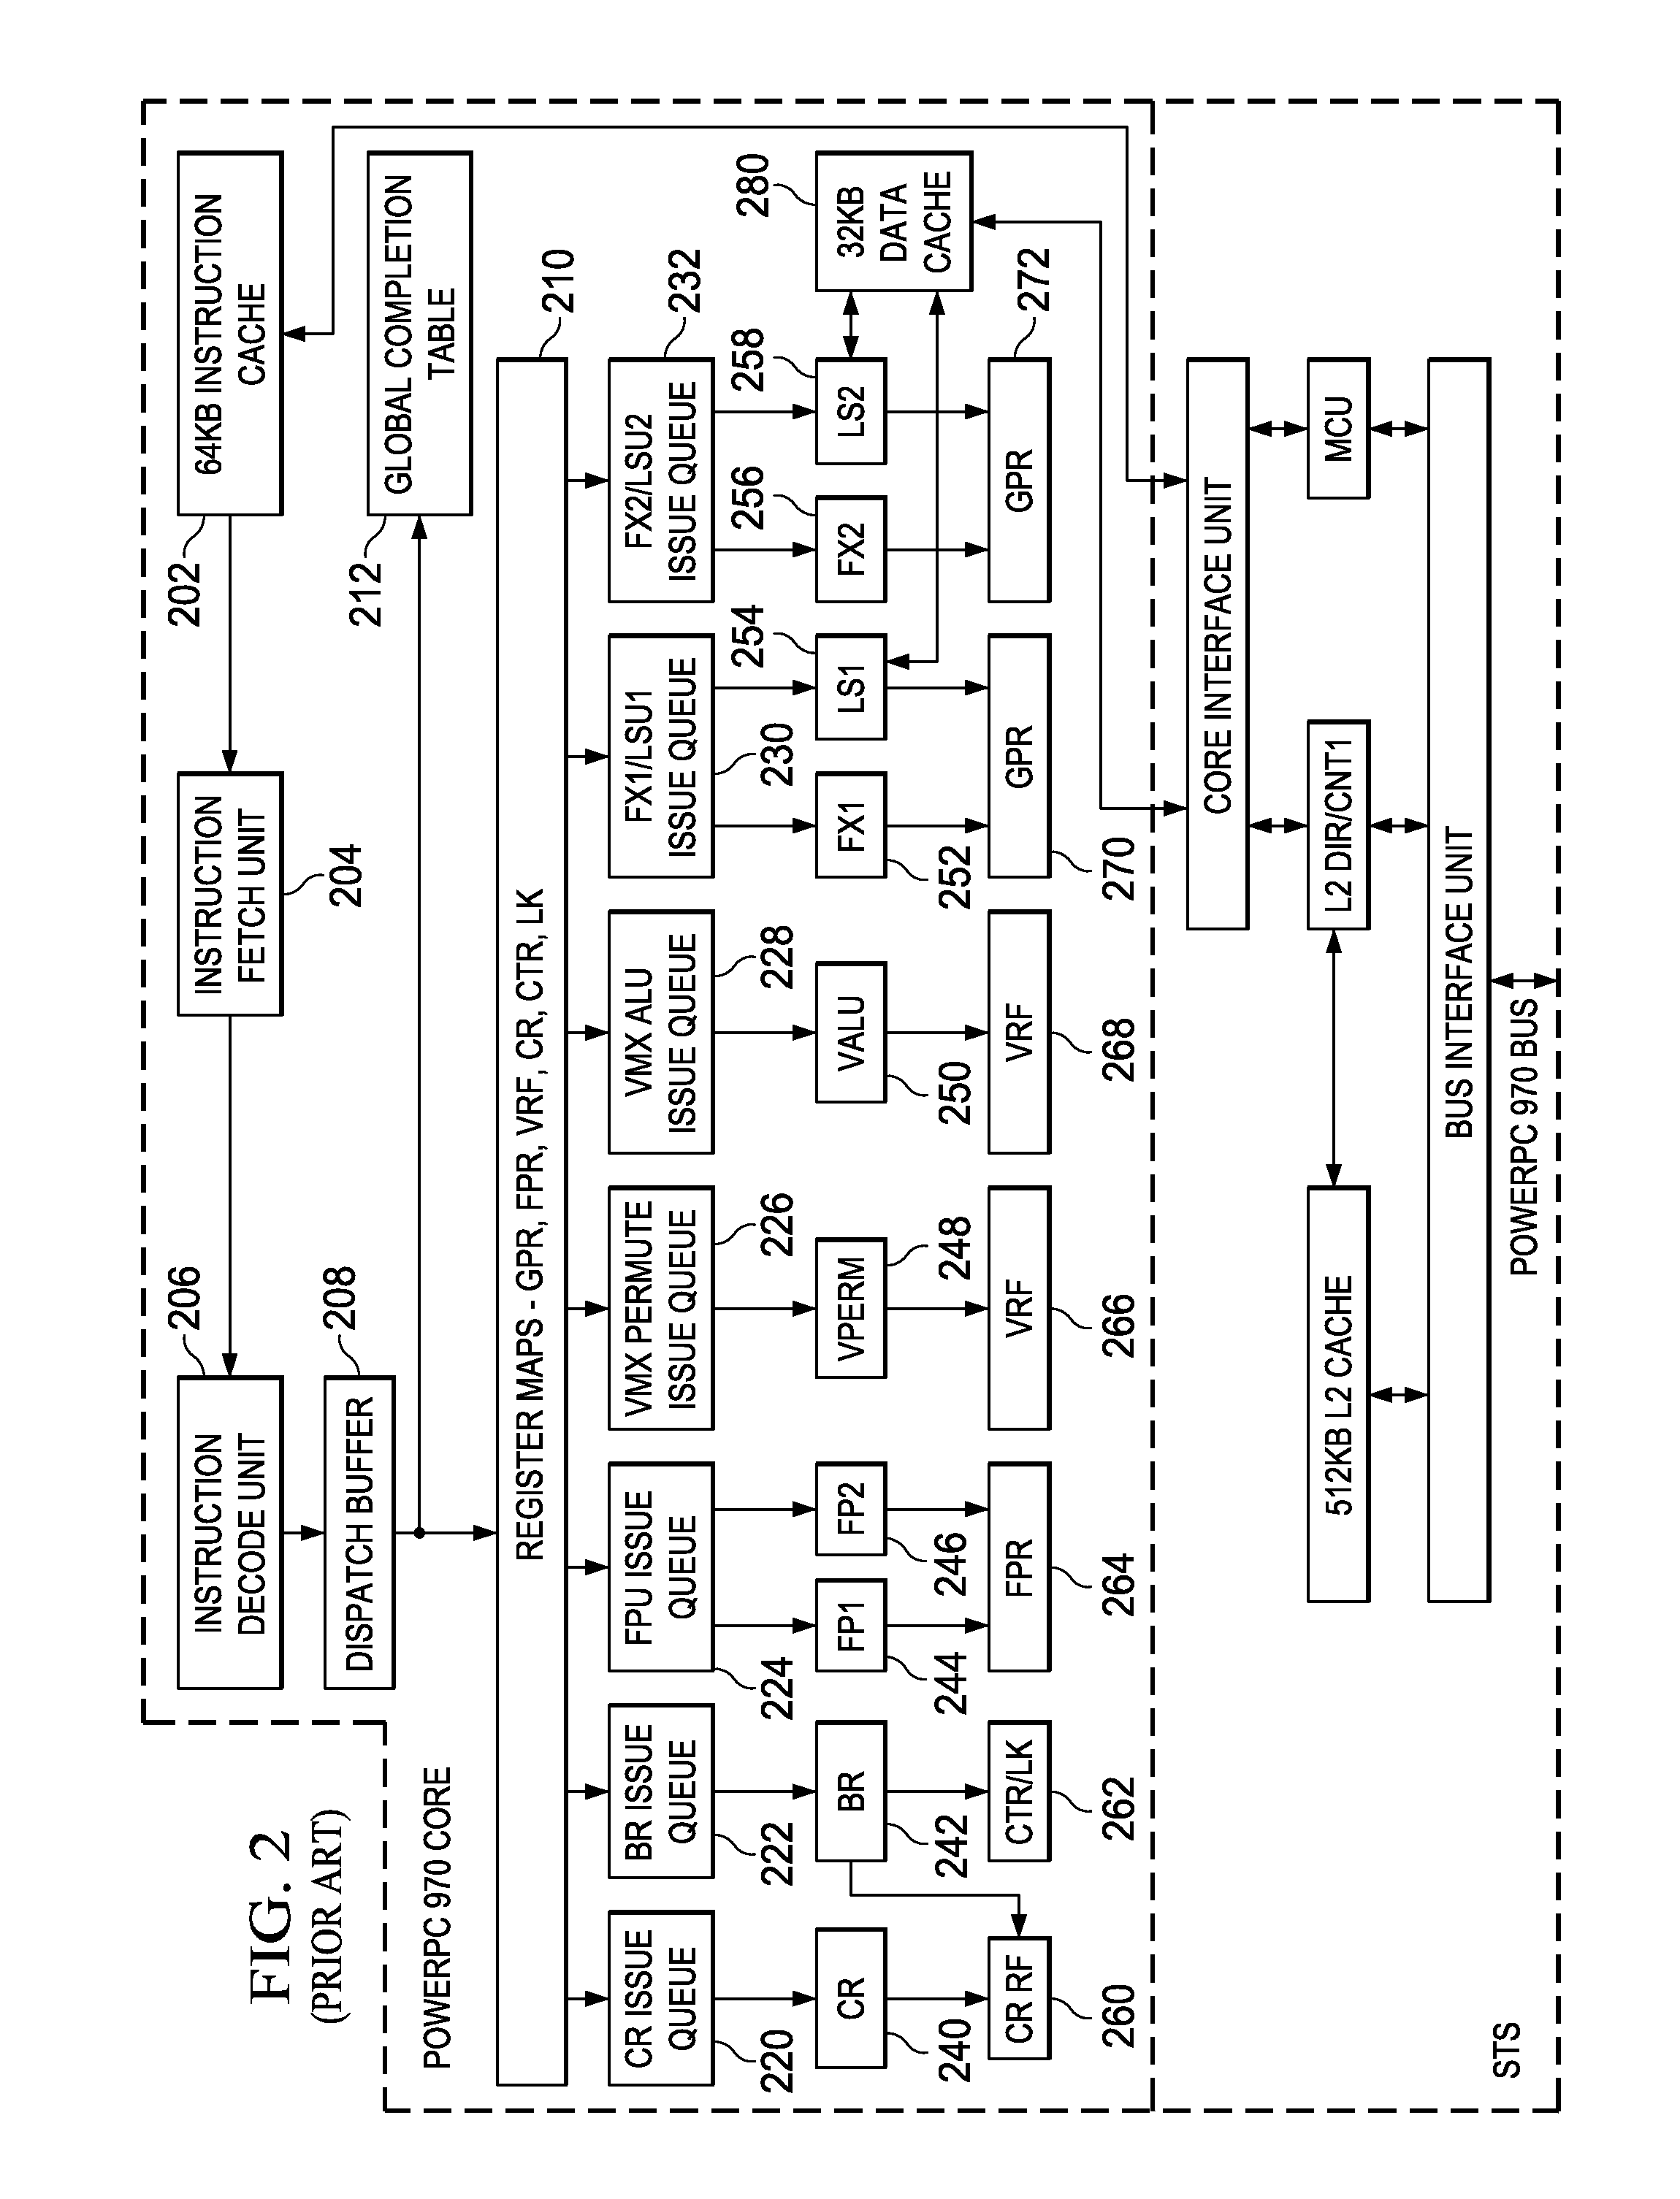 Generating and Executing Programs for a Floating Point Single Instruction Multiple Data Instruction Set Architecture